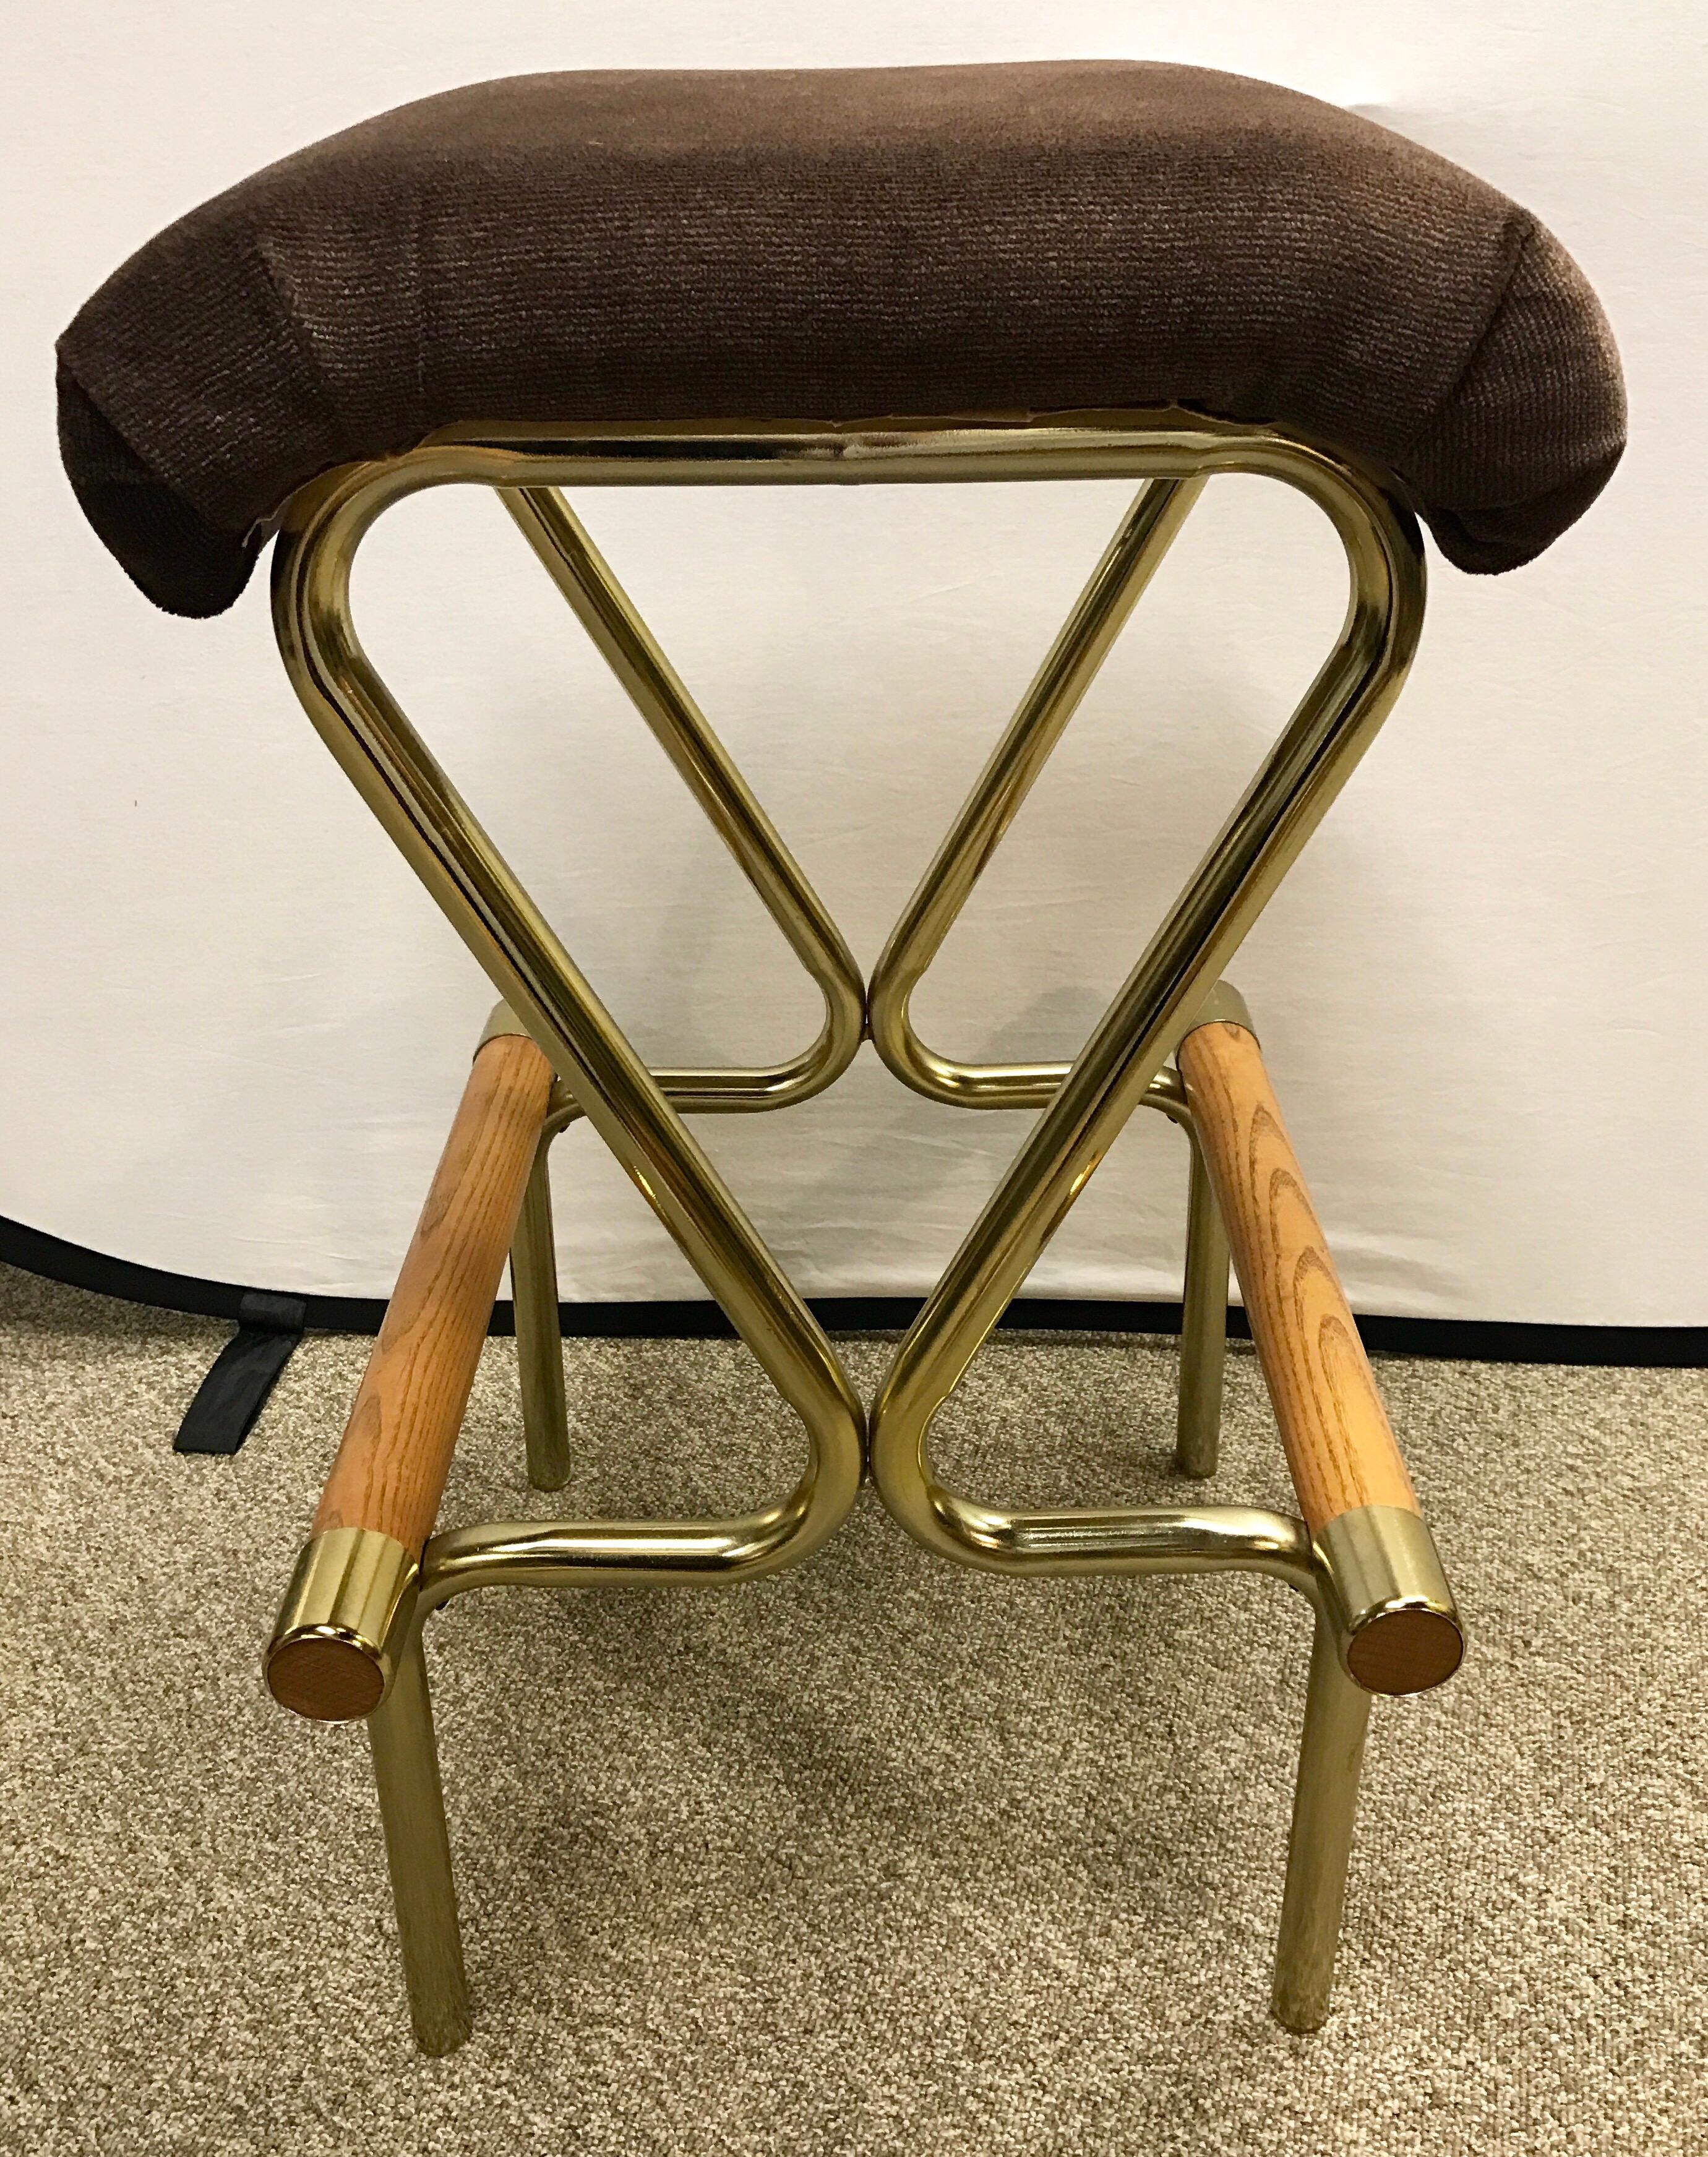 Gorgeous Mid-Century Modern stool with chocolate brown upholstered seat.